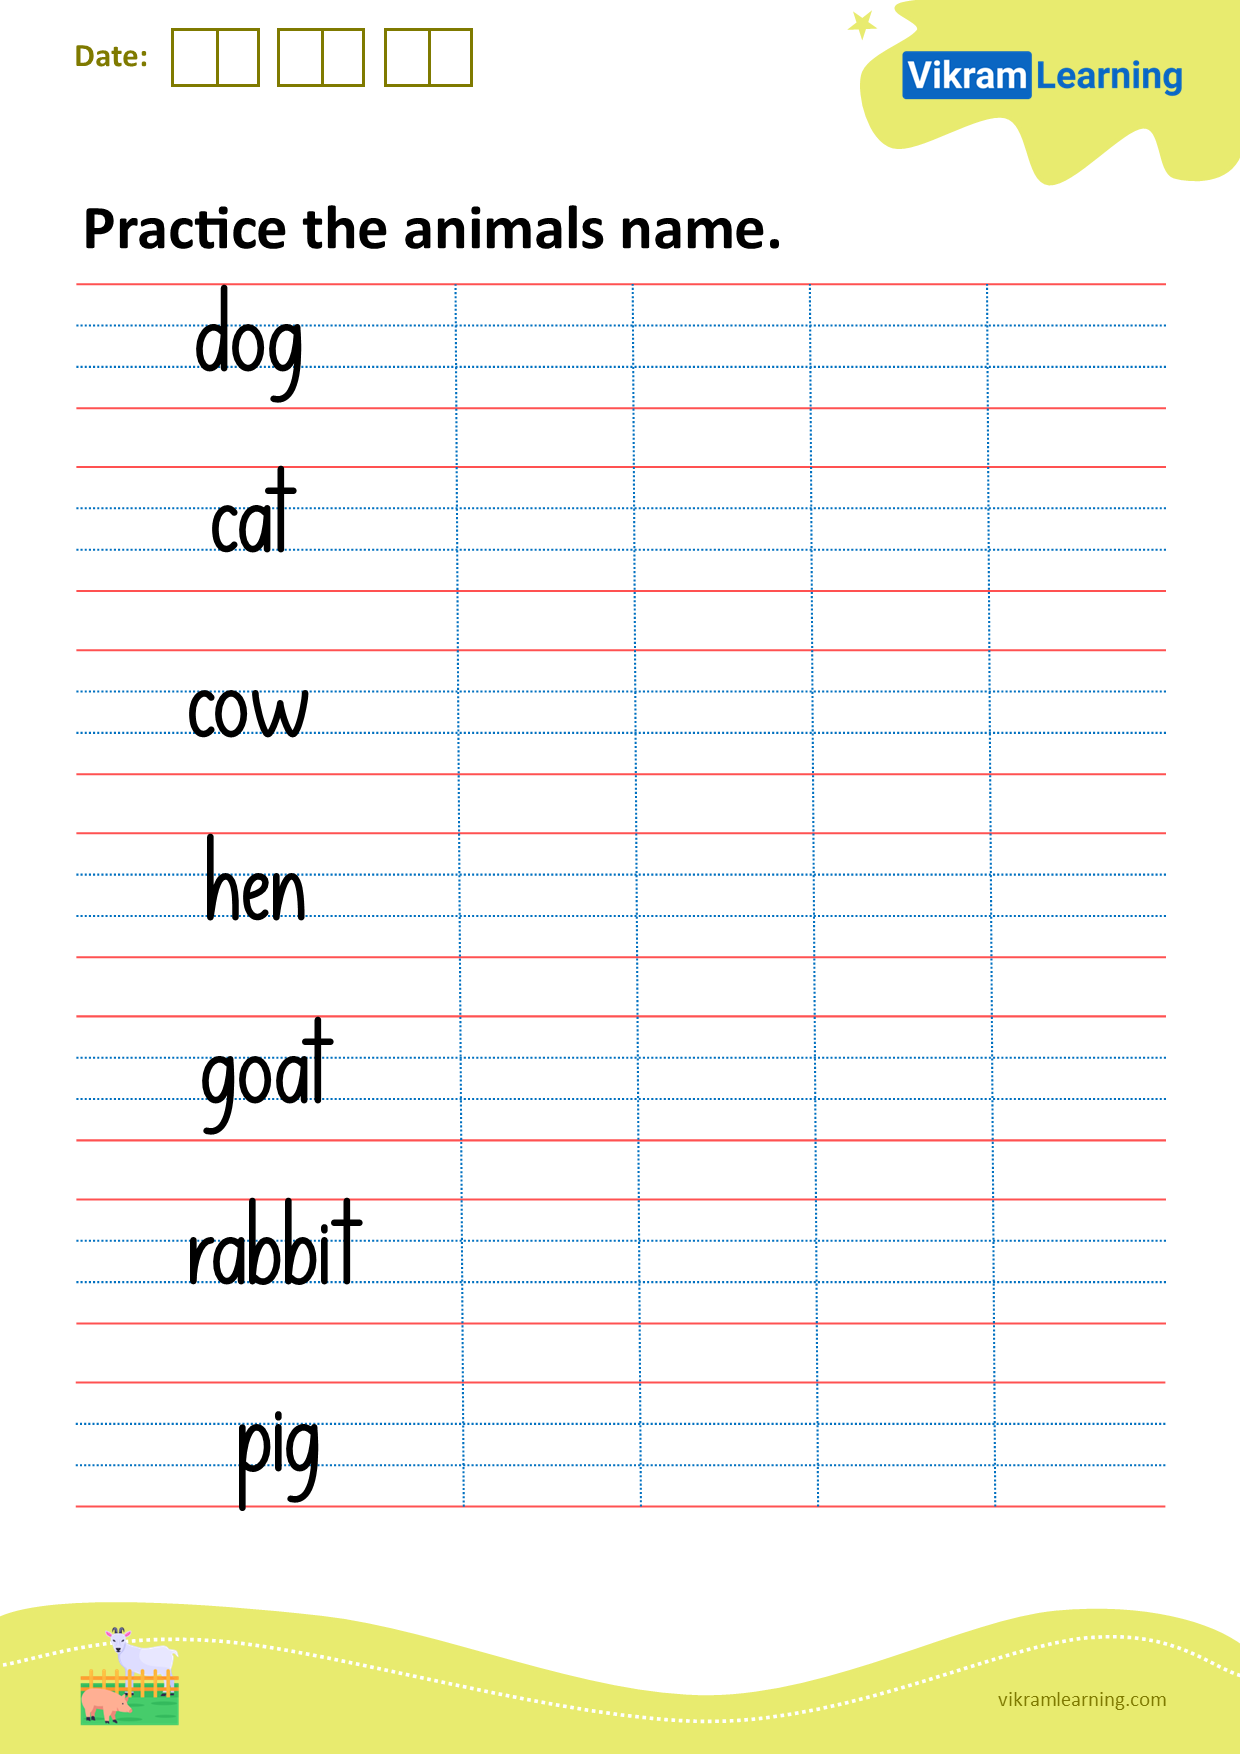 Download practice the animal's name worksheets